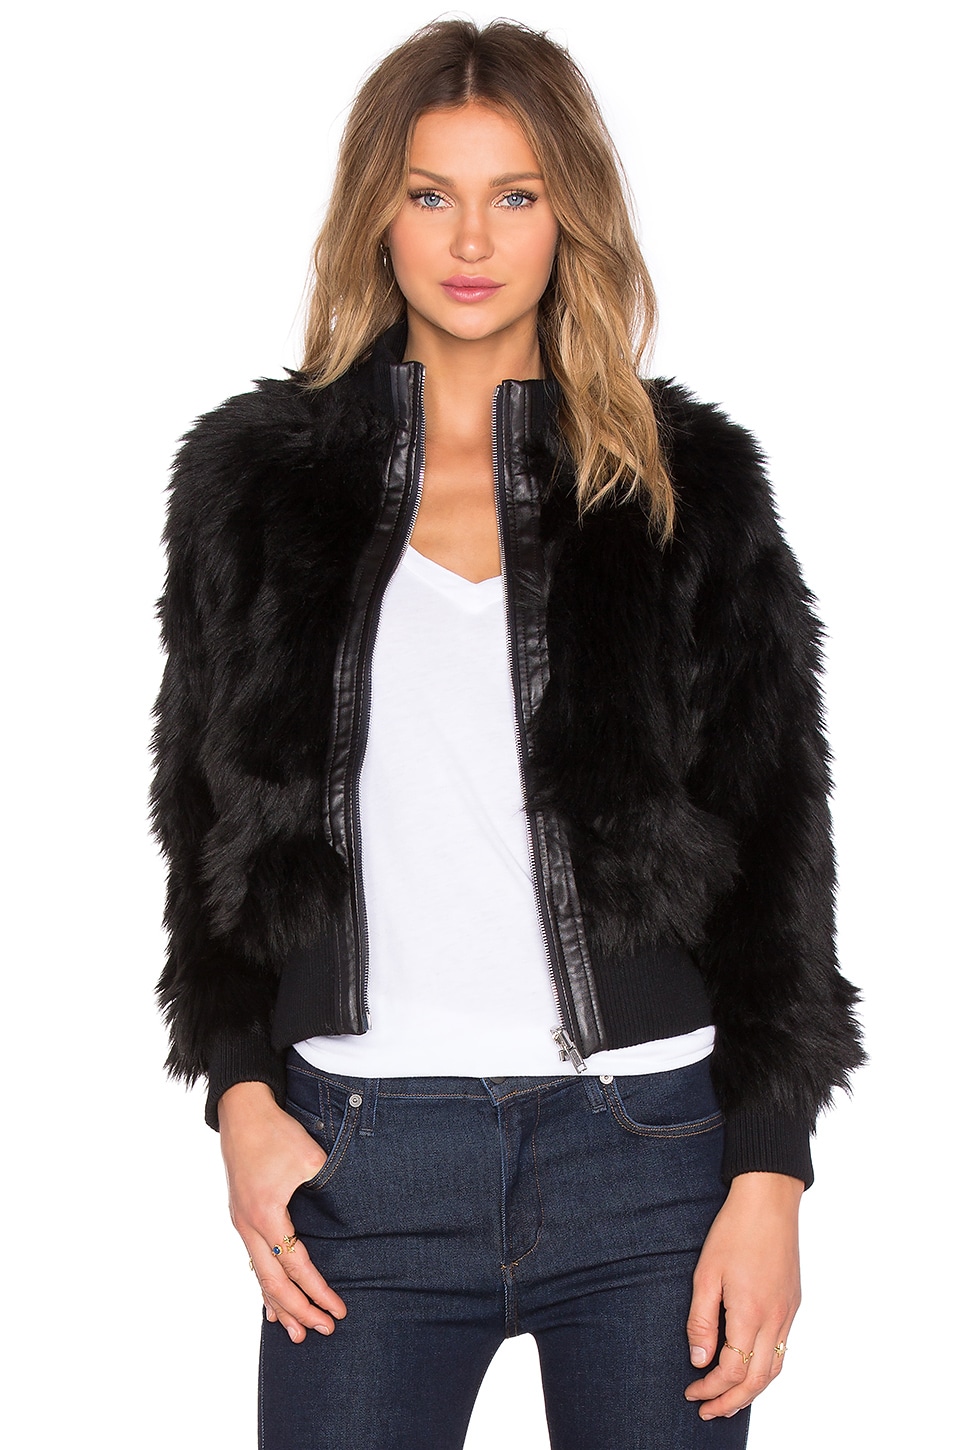 7 For All Mankind Luxe Faux Fur Jacket in Black | REVOLVE